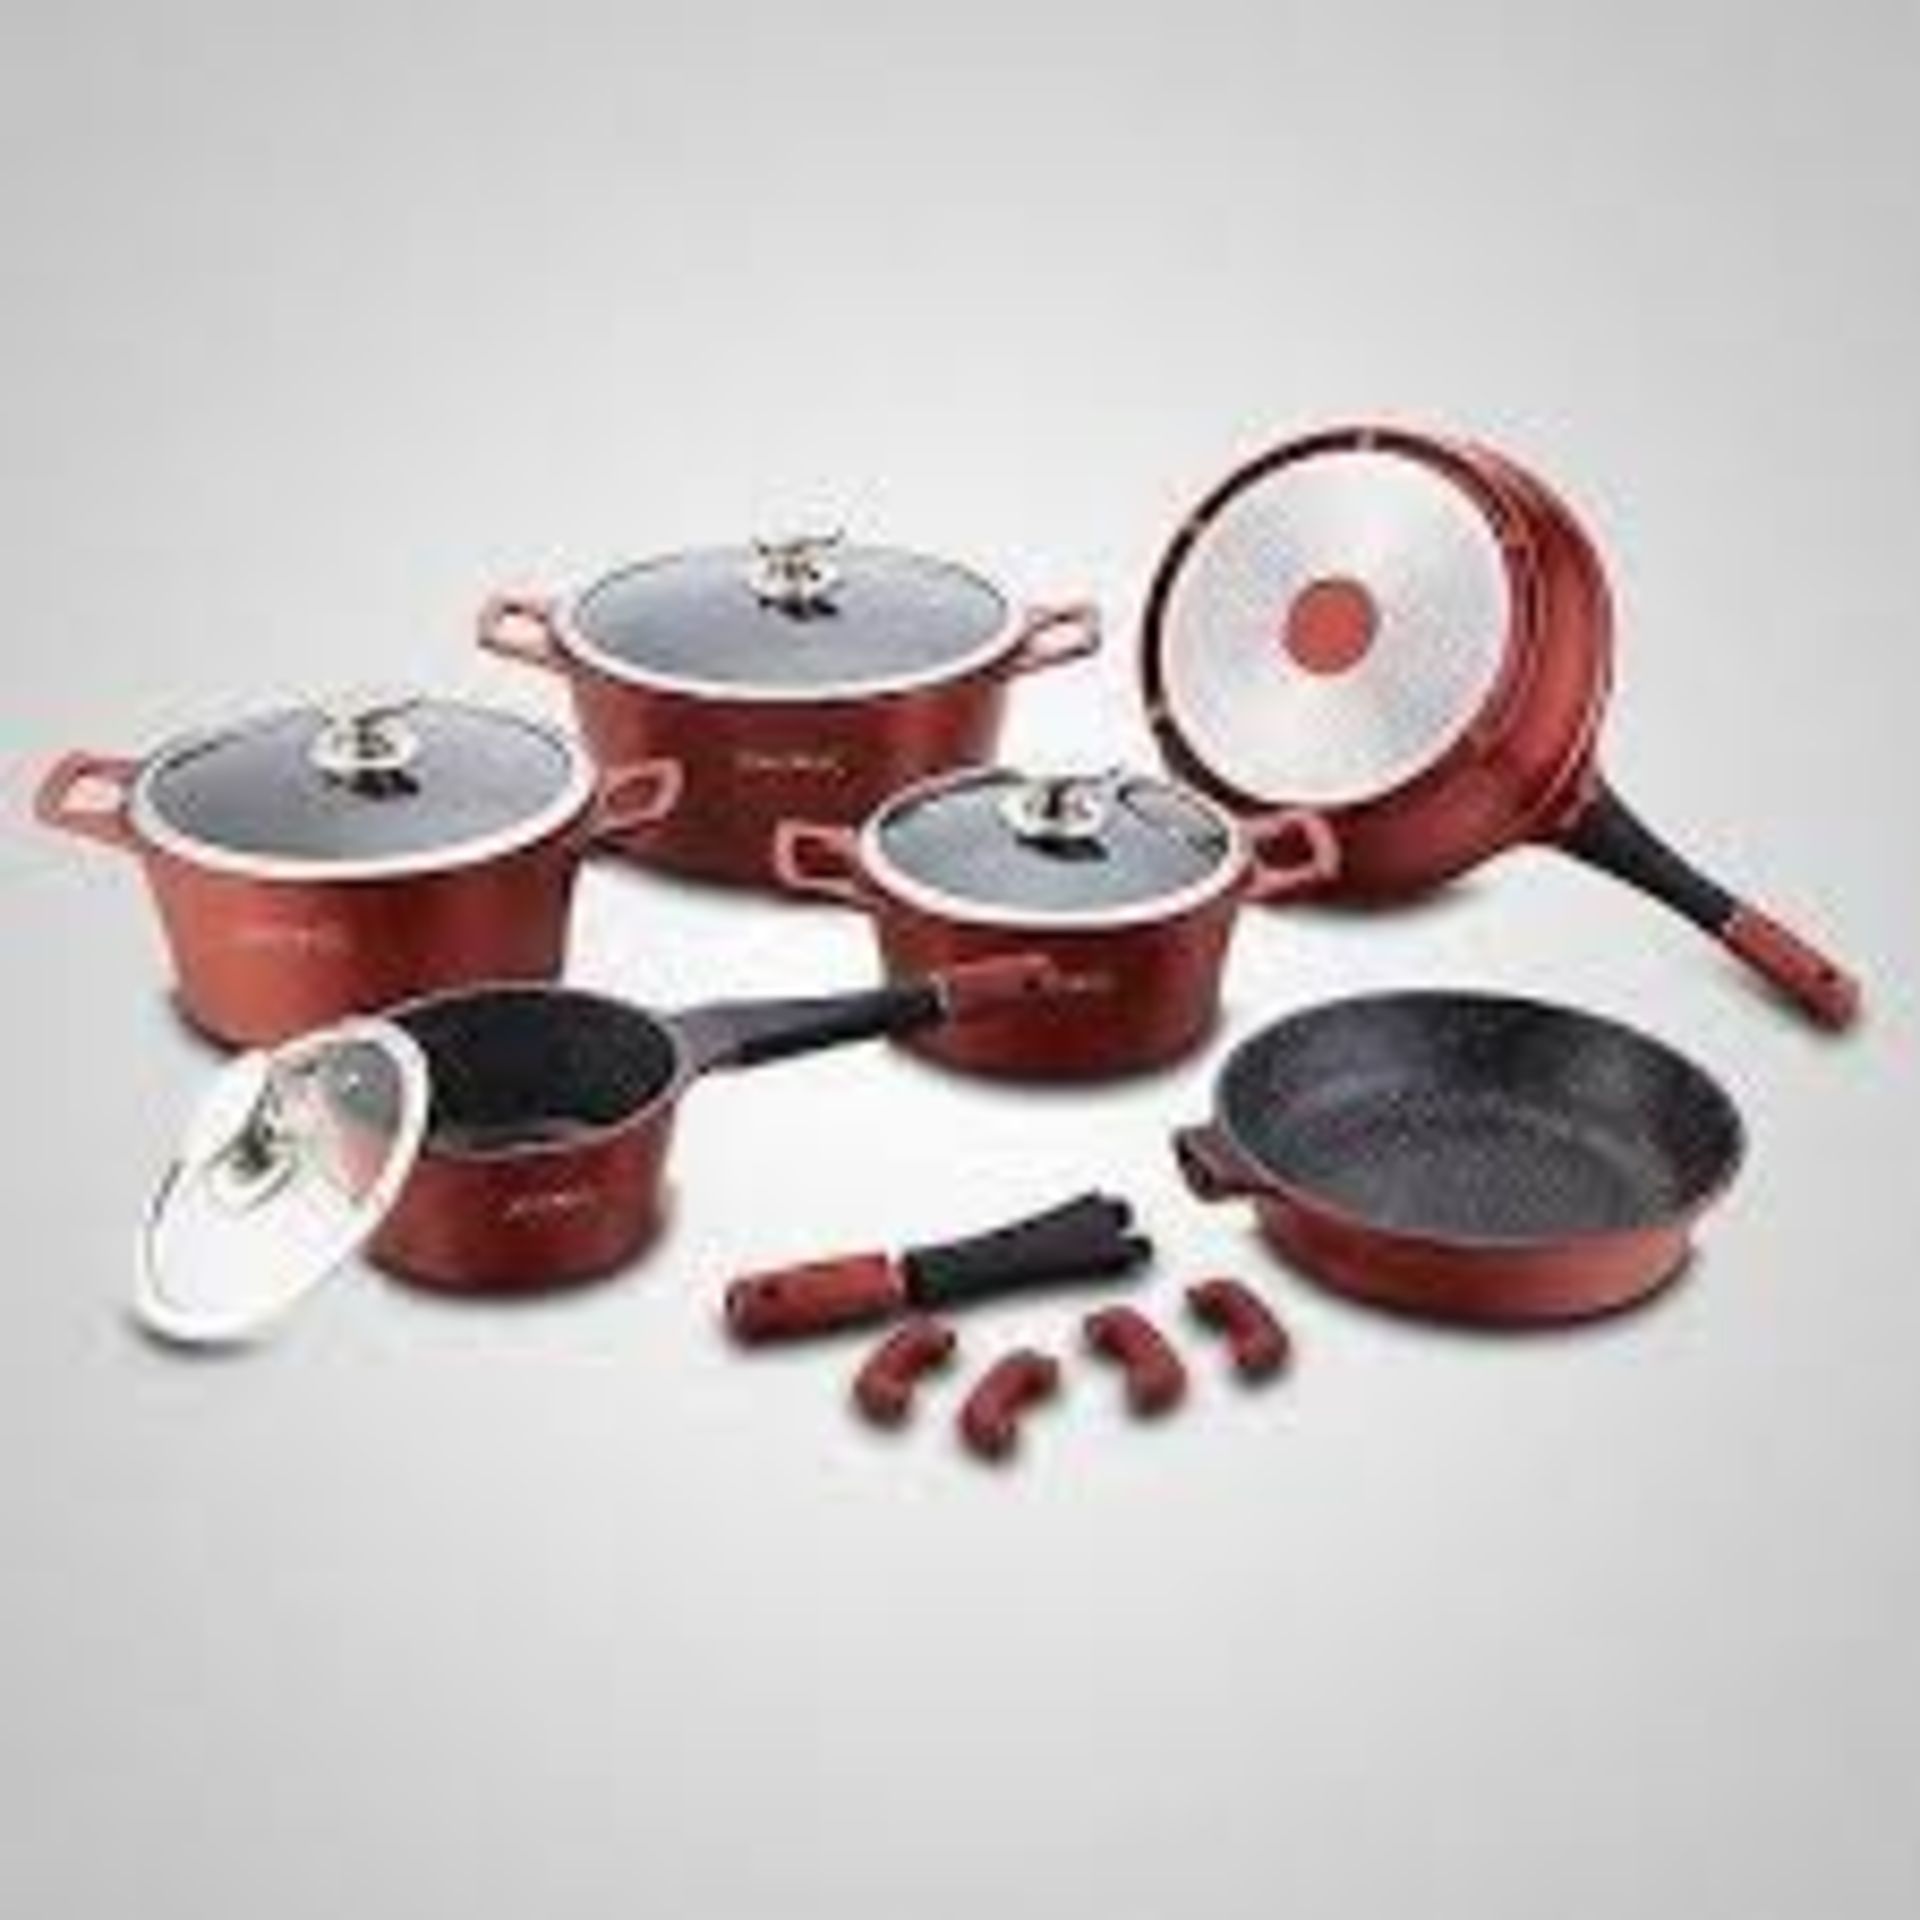 V Brand New Ten Piece Forged Marble Saucepan Set Including Two Frying Pans-Stock Pots ETC